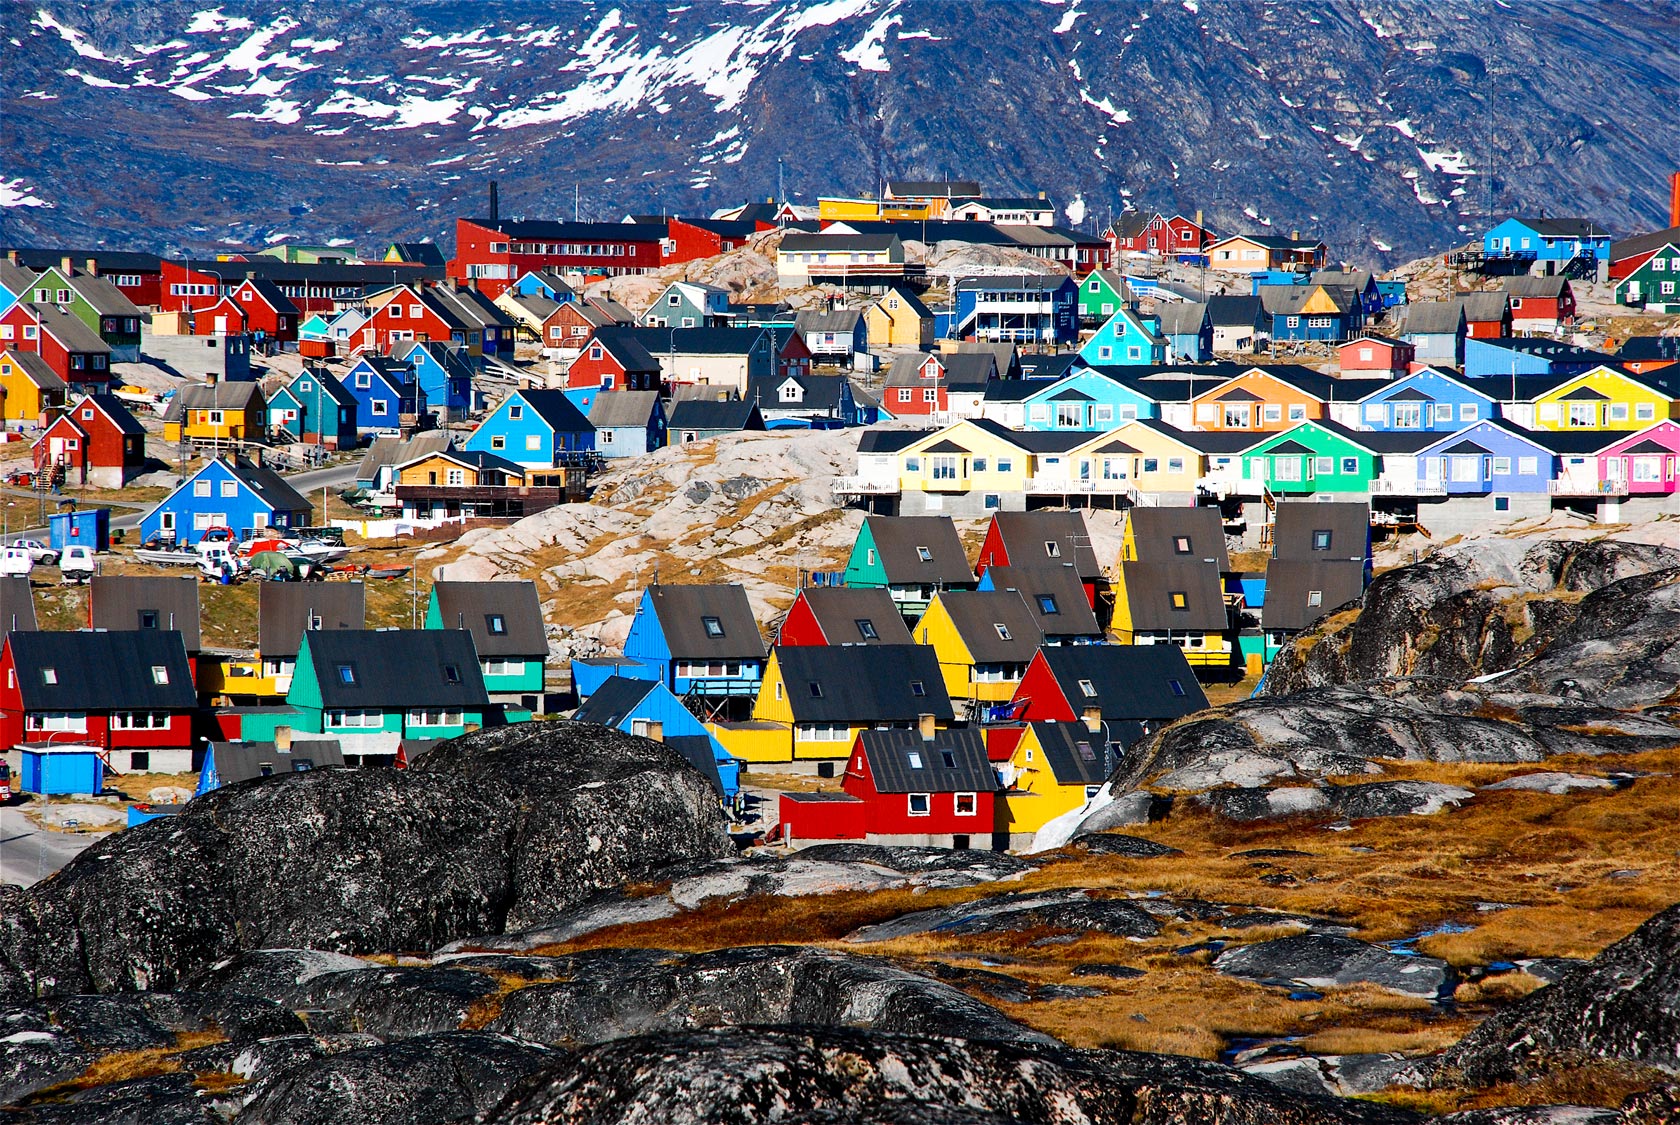 The colorful houses make the landscape of this little village unbelievable beautiful